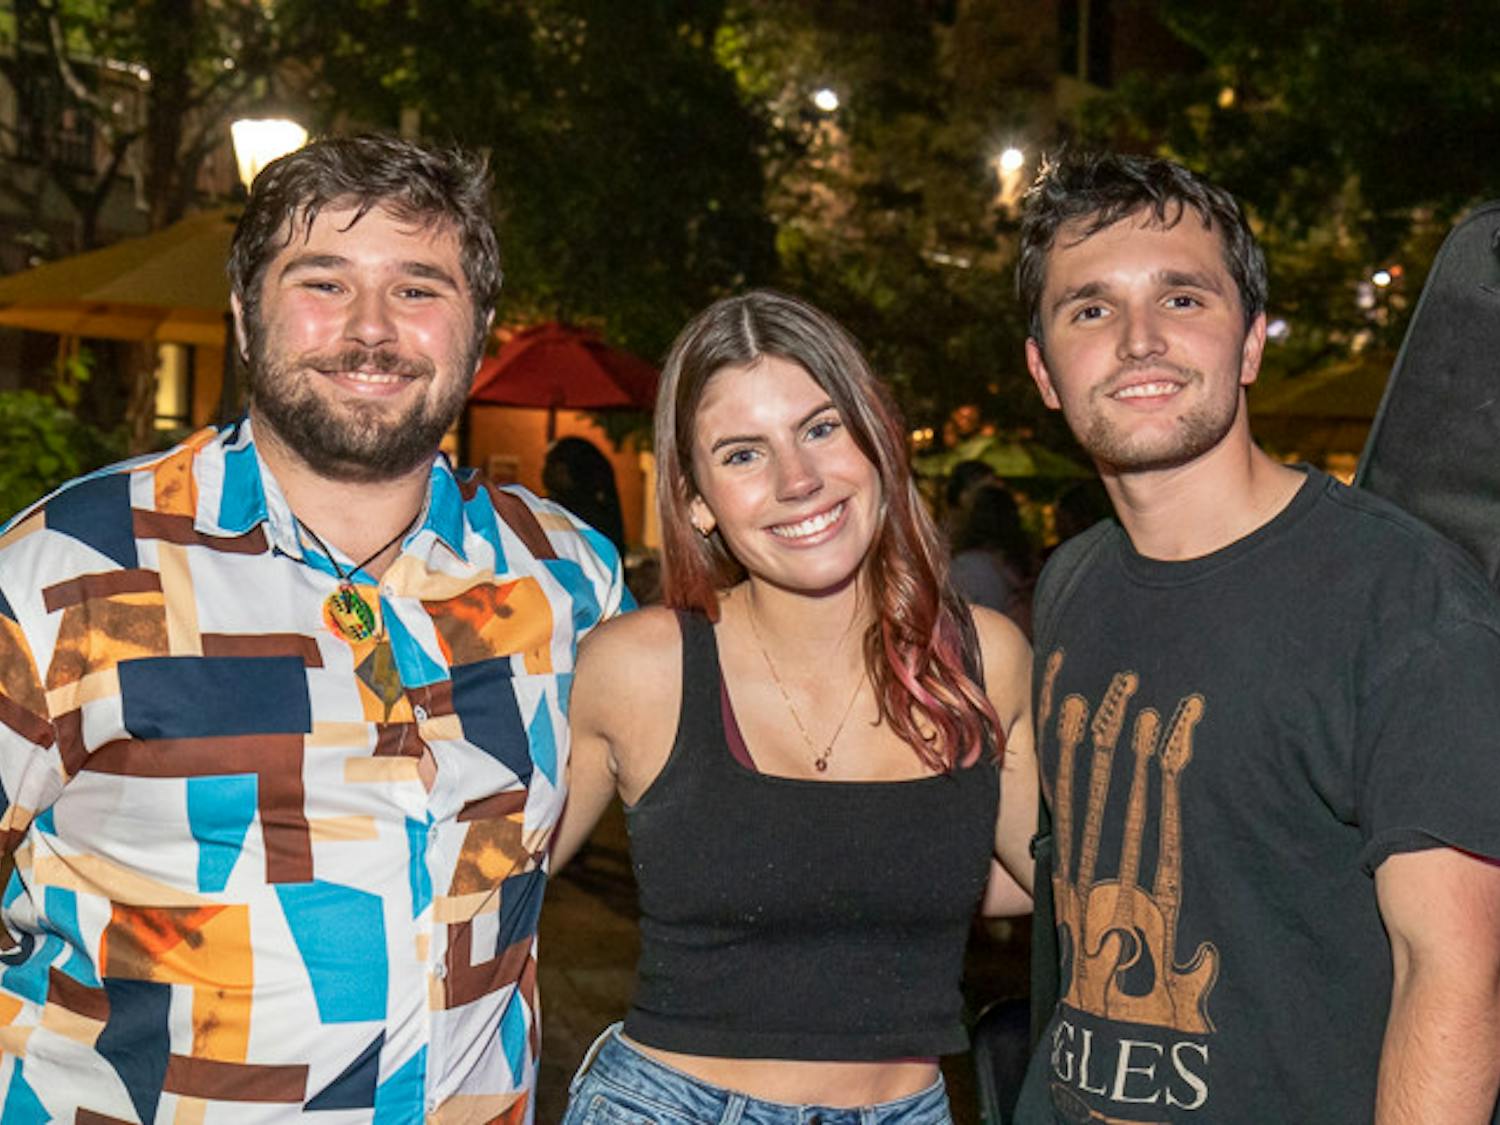 The House Band's lead singer Tyler Bomse (left), bassist Madison Adams (center), and guitarist Carter Vogt pose after the Battle of the Bands on Oct. 5, 2022. The rock band won the evening's competition and will perform at the UofSC Homecoming Block party on Oct. 28, 2022.